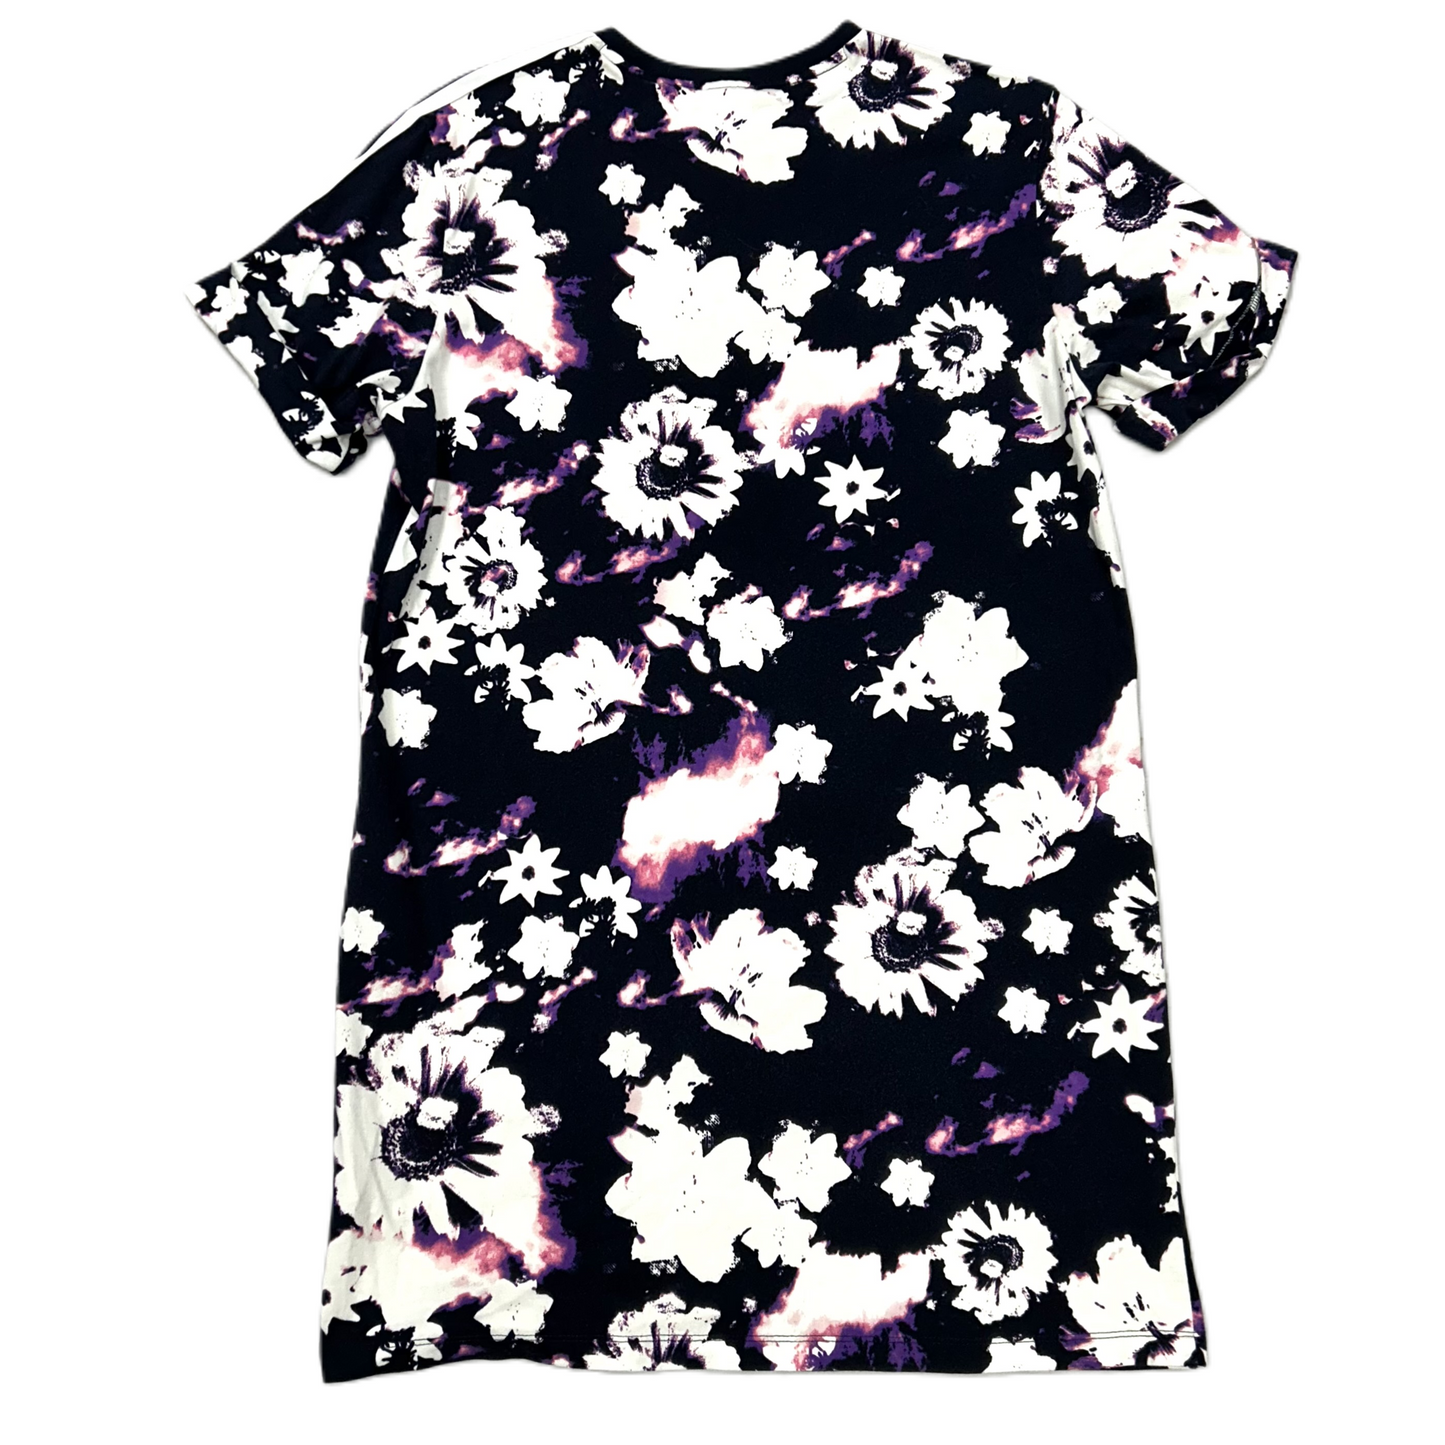 Floral Print Dress Casual Short By Adidas, Size: M